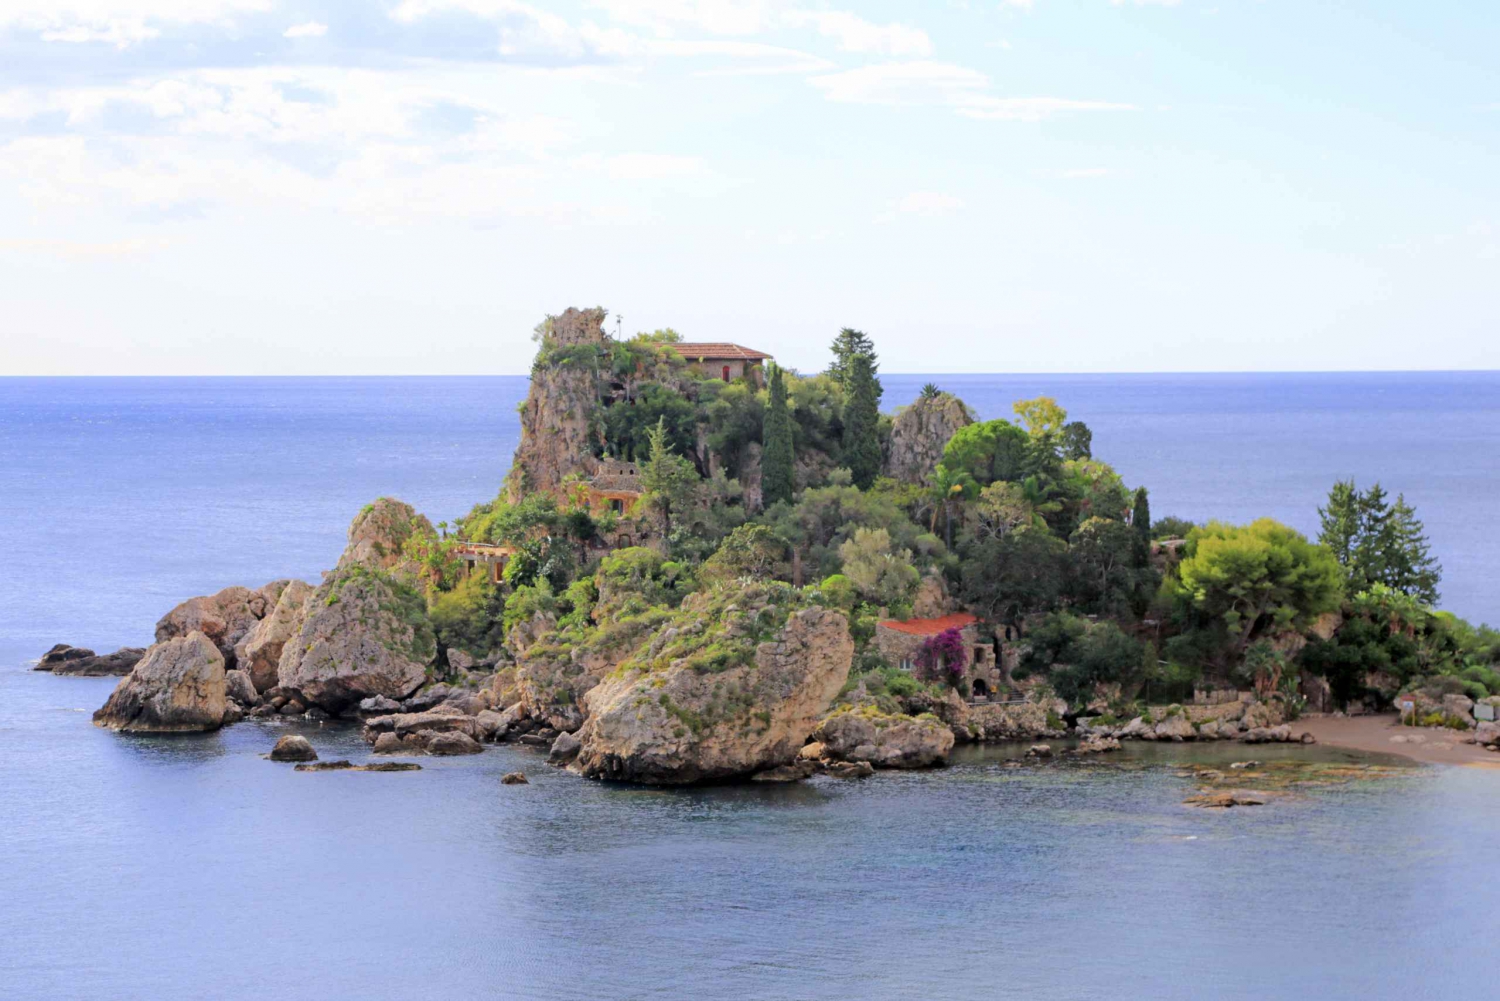 From Tropea: Full-Day Tour to Taormina in Sicily